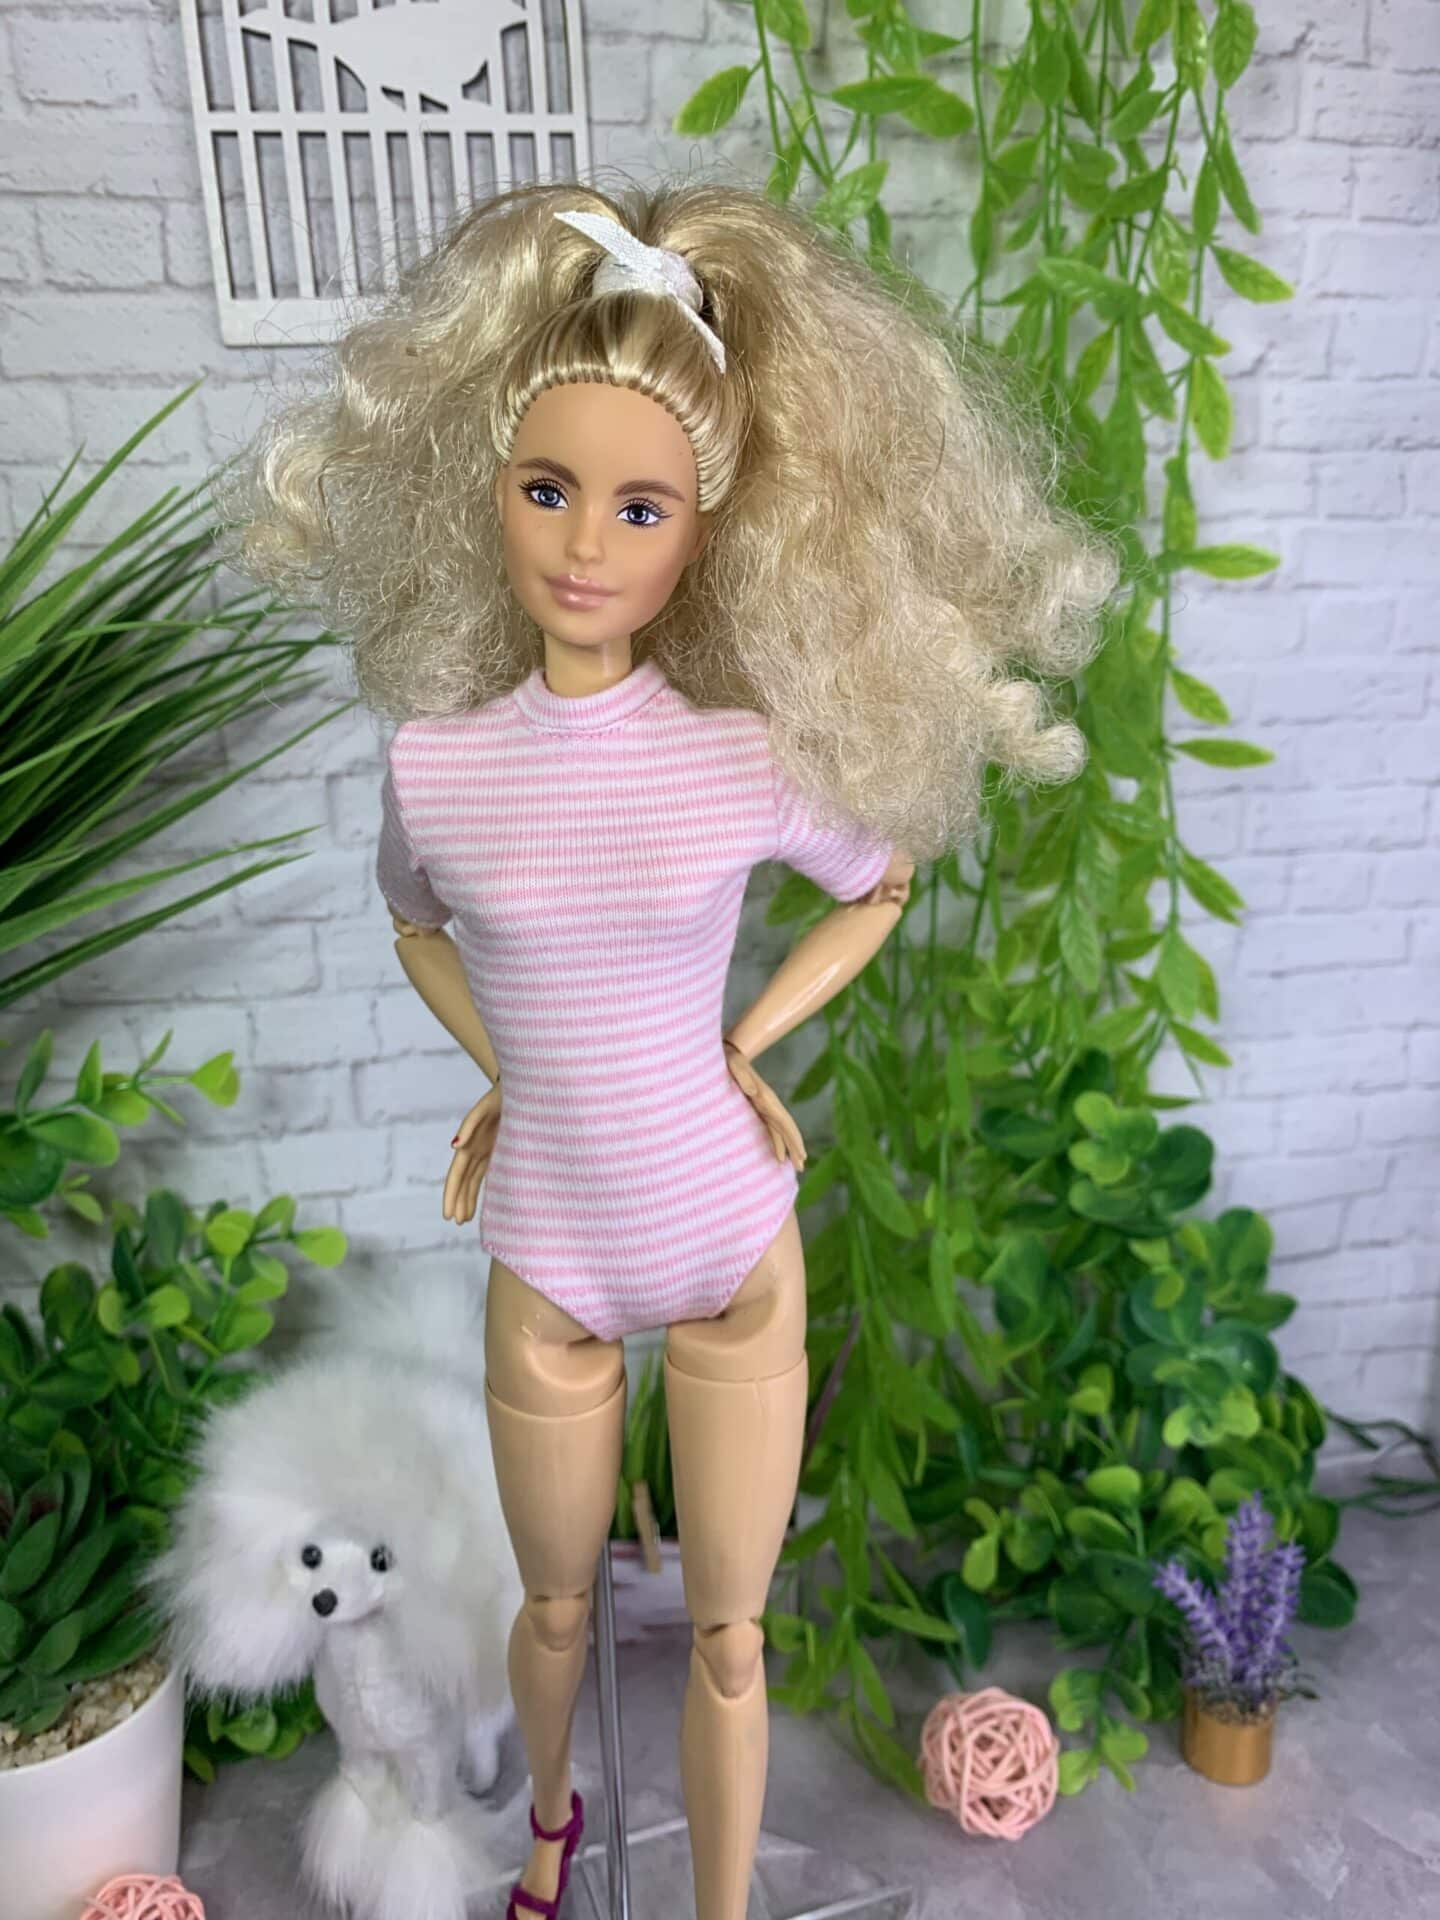 Barbie Looks Doll, Blonde, Color Block Outfit with Waist Cut-Out 